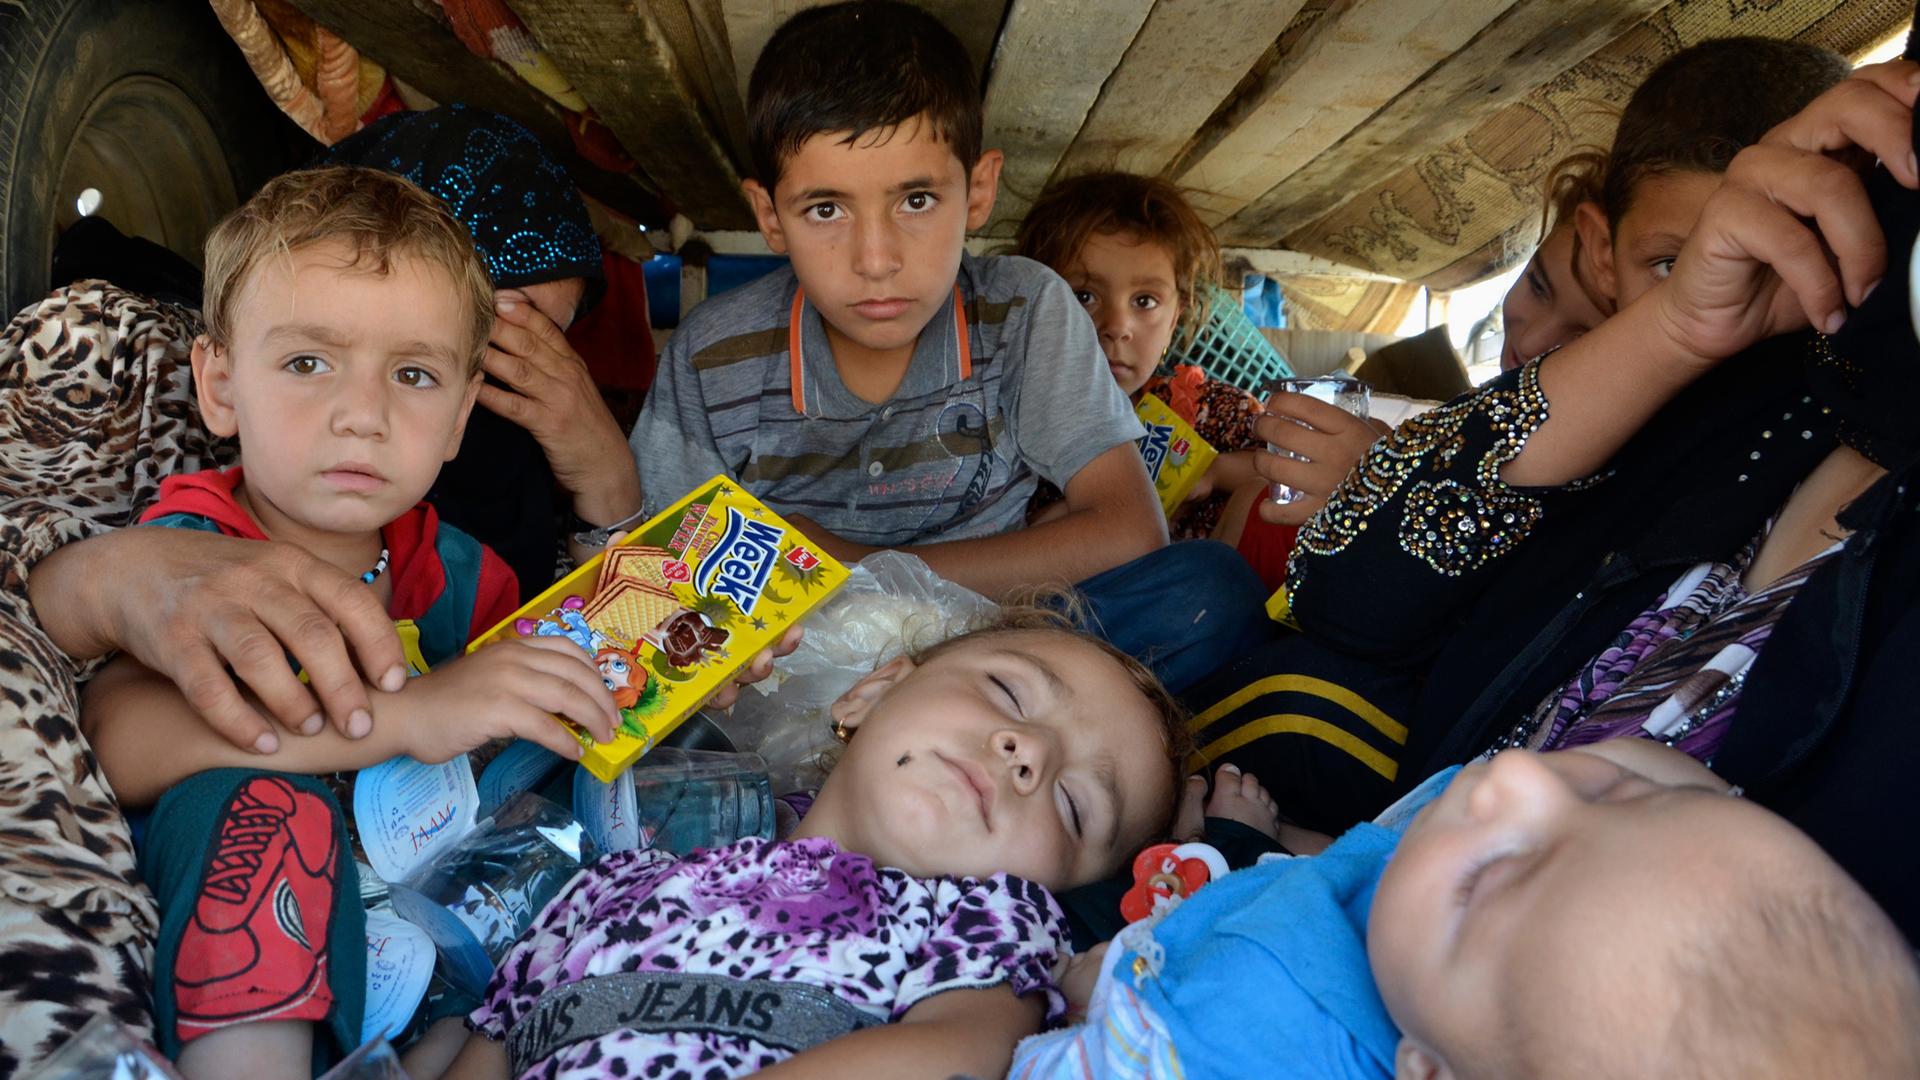 Displaced people, who fled from the violence in the province of Nineveh, arrive at Sulaimaniya province August 8, 2014. The United States began to drop relief supplies to beleaguered Yazidi refugees fleeing Islamist militants in Iraq, but there was no imm